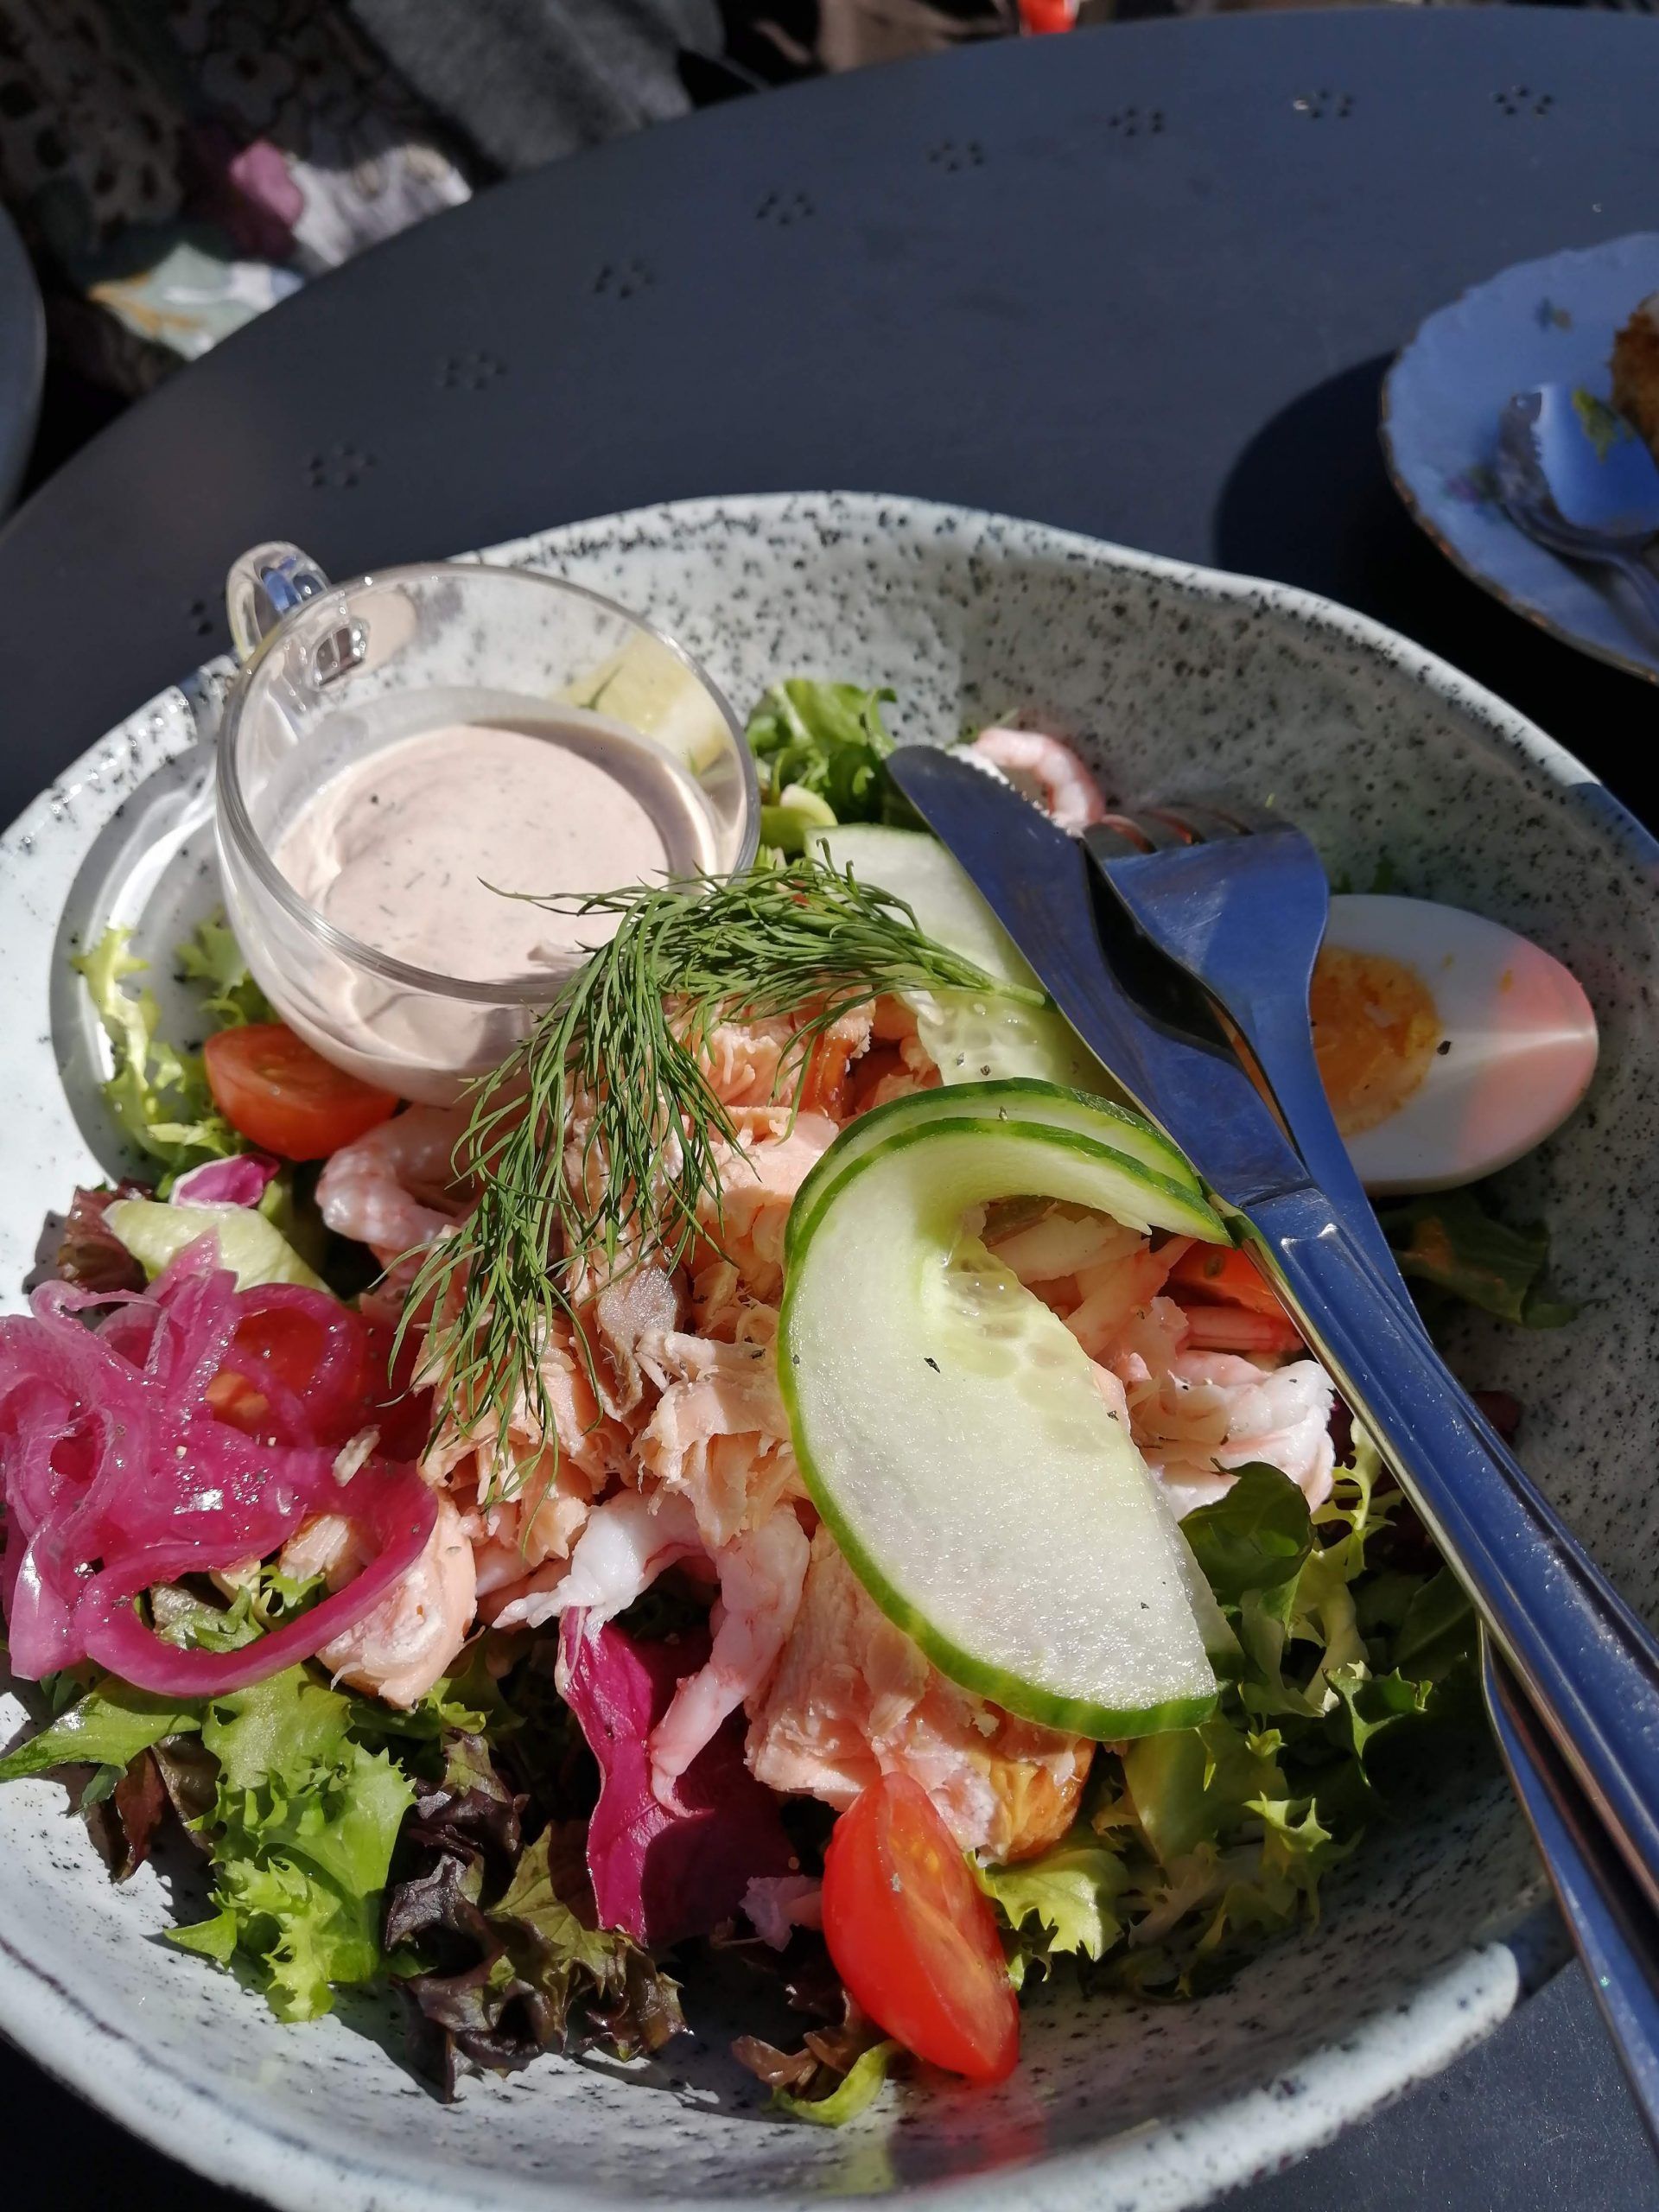 A prawn, cucumber and pickled red onion salad on mixed leaves